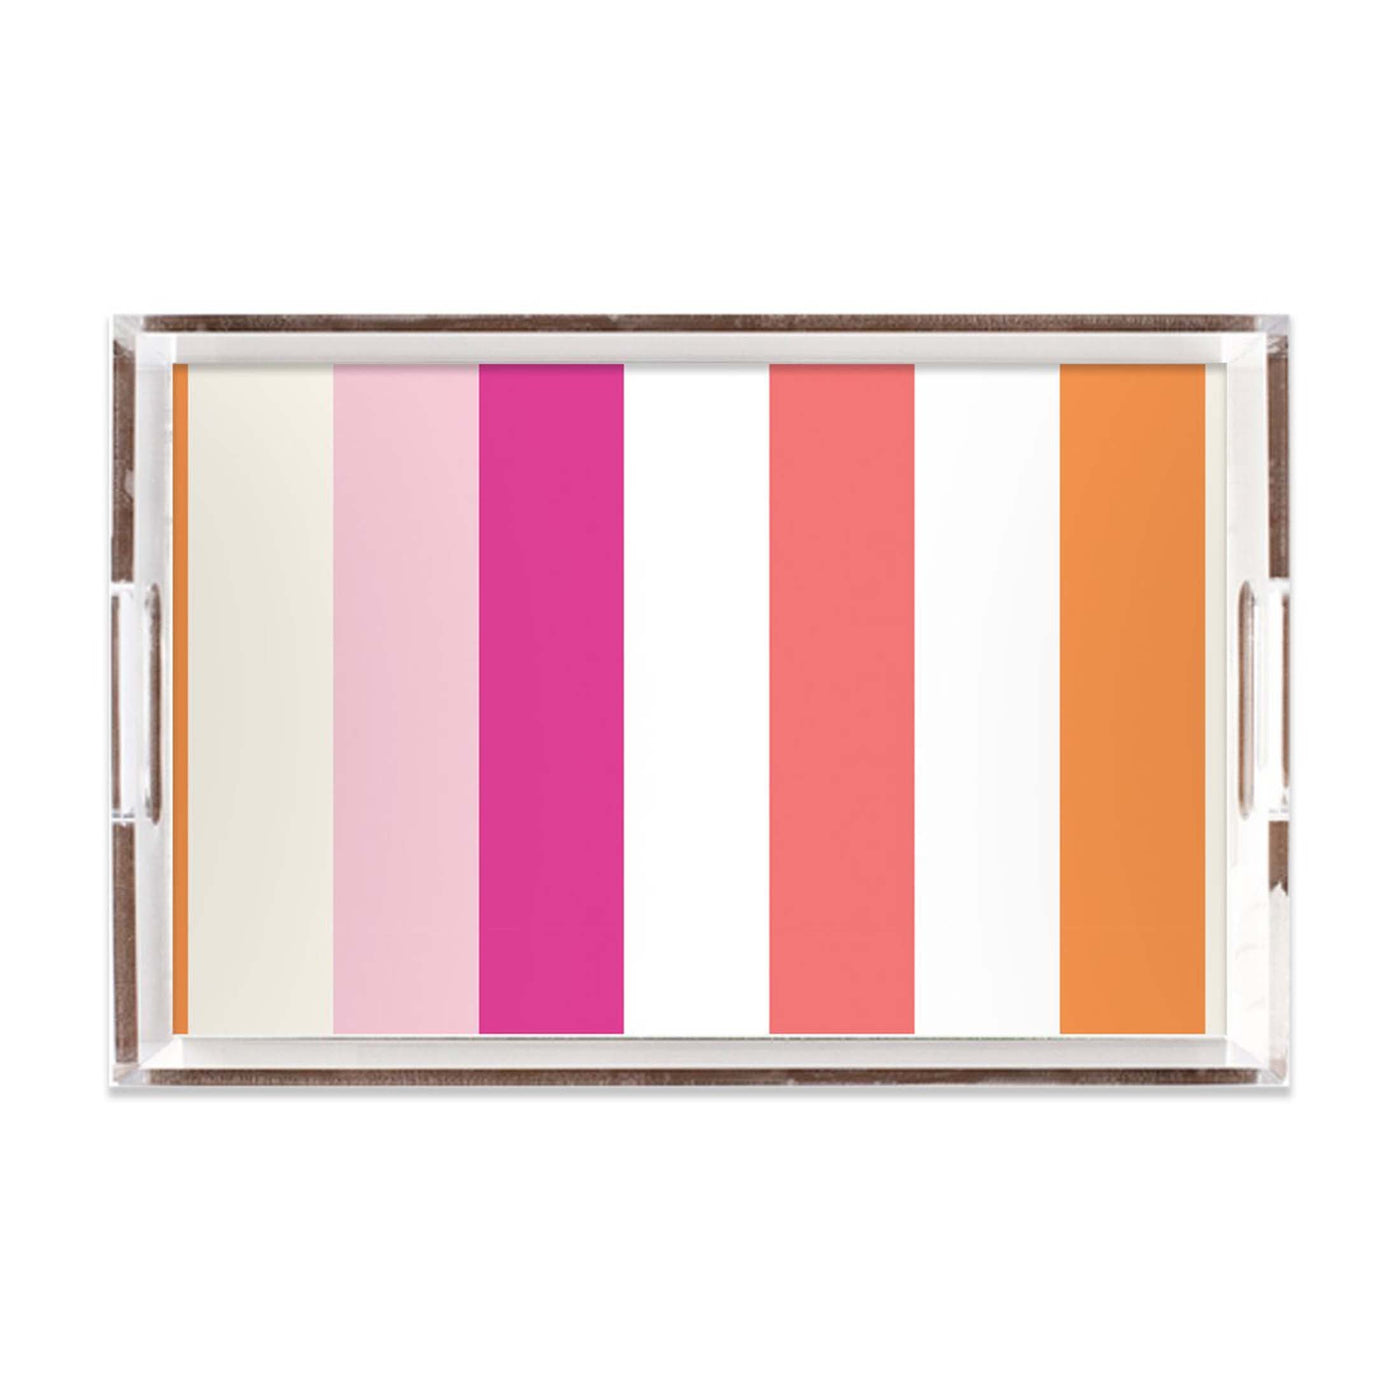 Lucite Trays Pink / 11x17 Cottage Stripes Lucite Tray Katie Kime